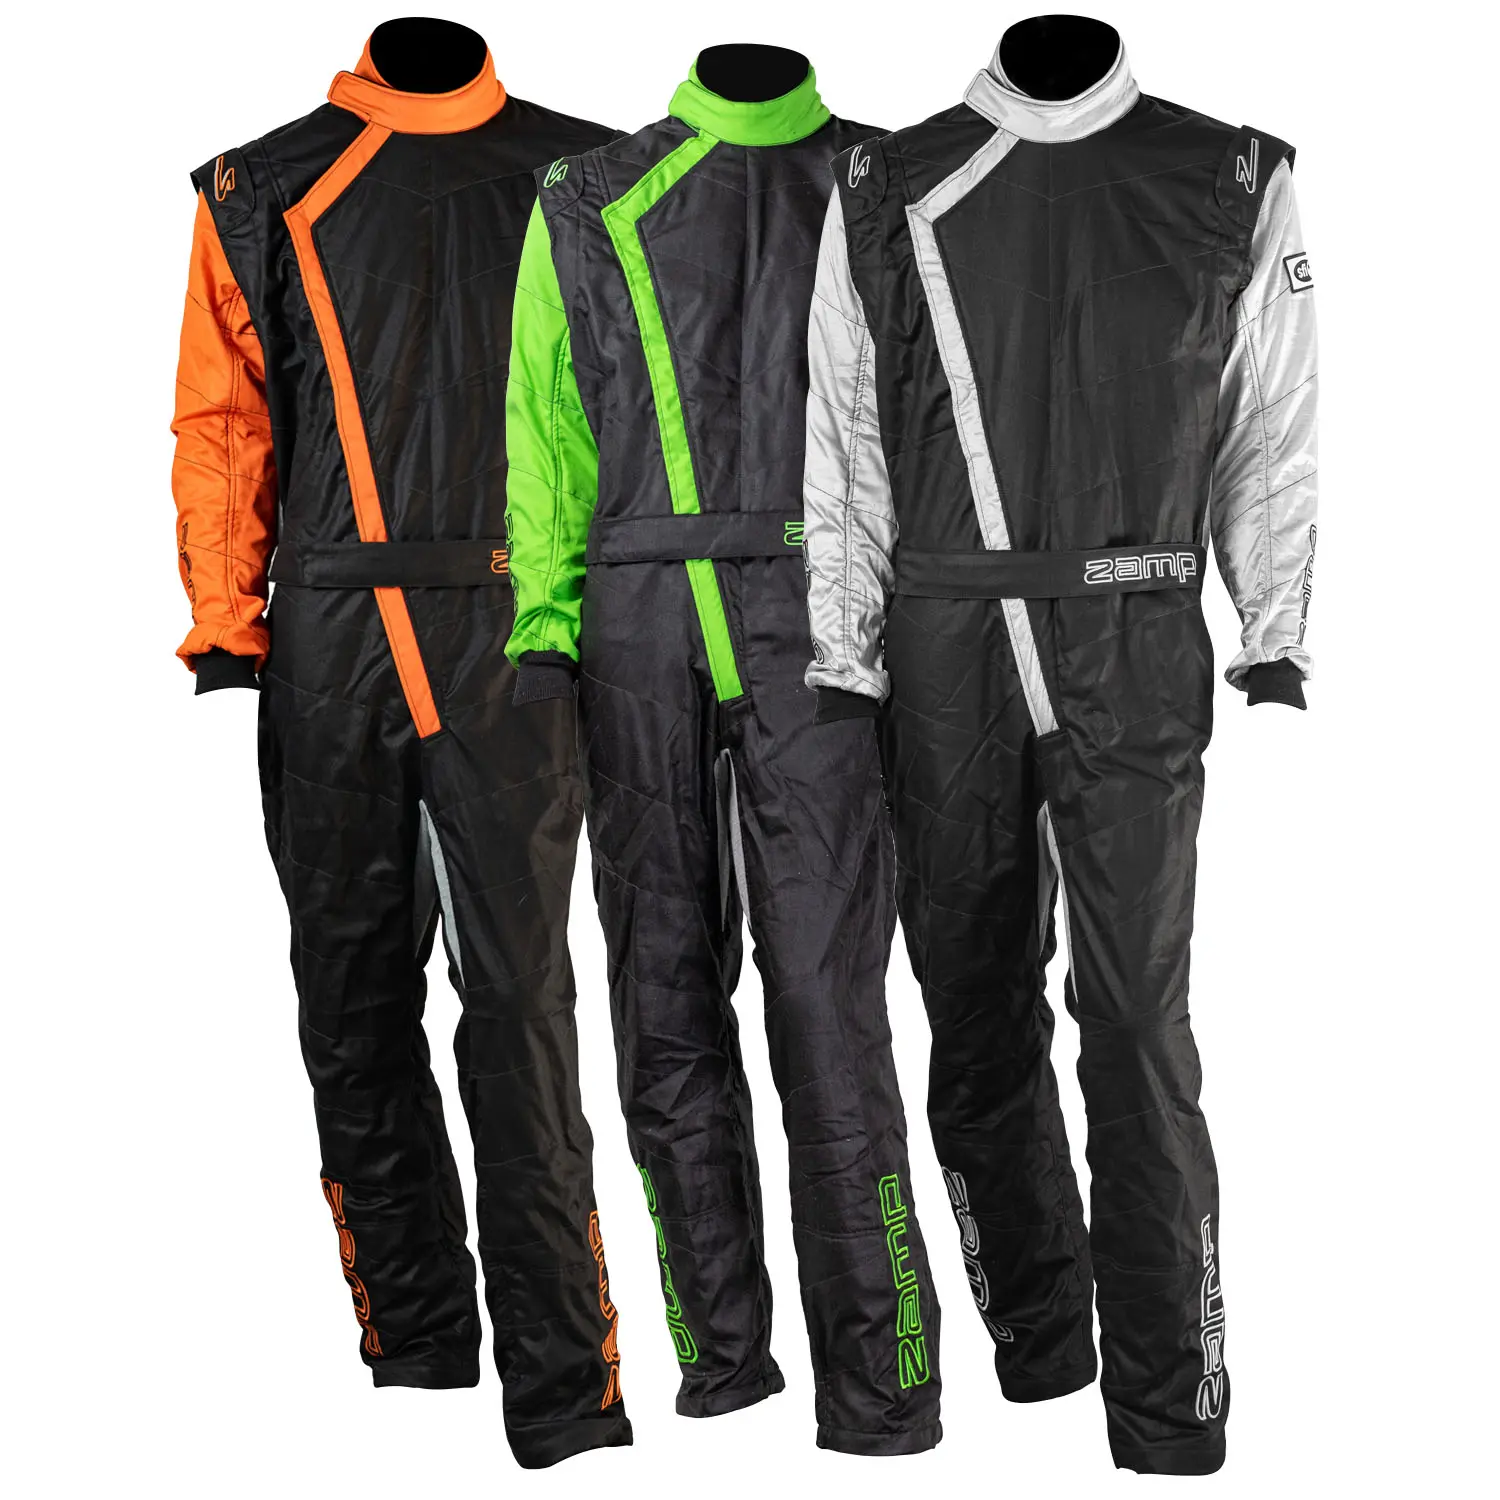 ZR-40 Youth Racing Suit